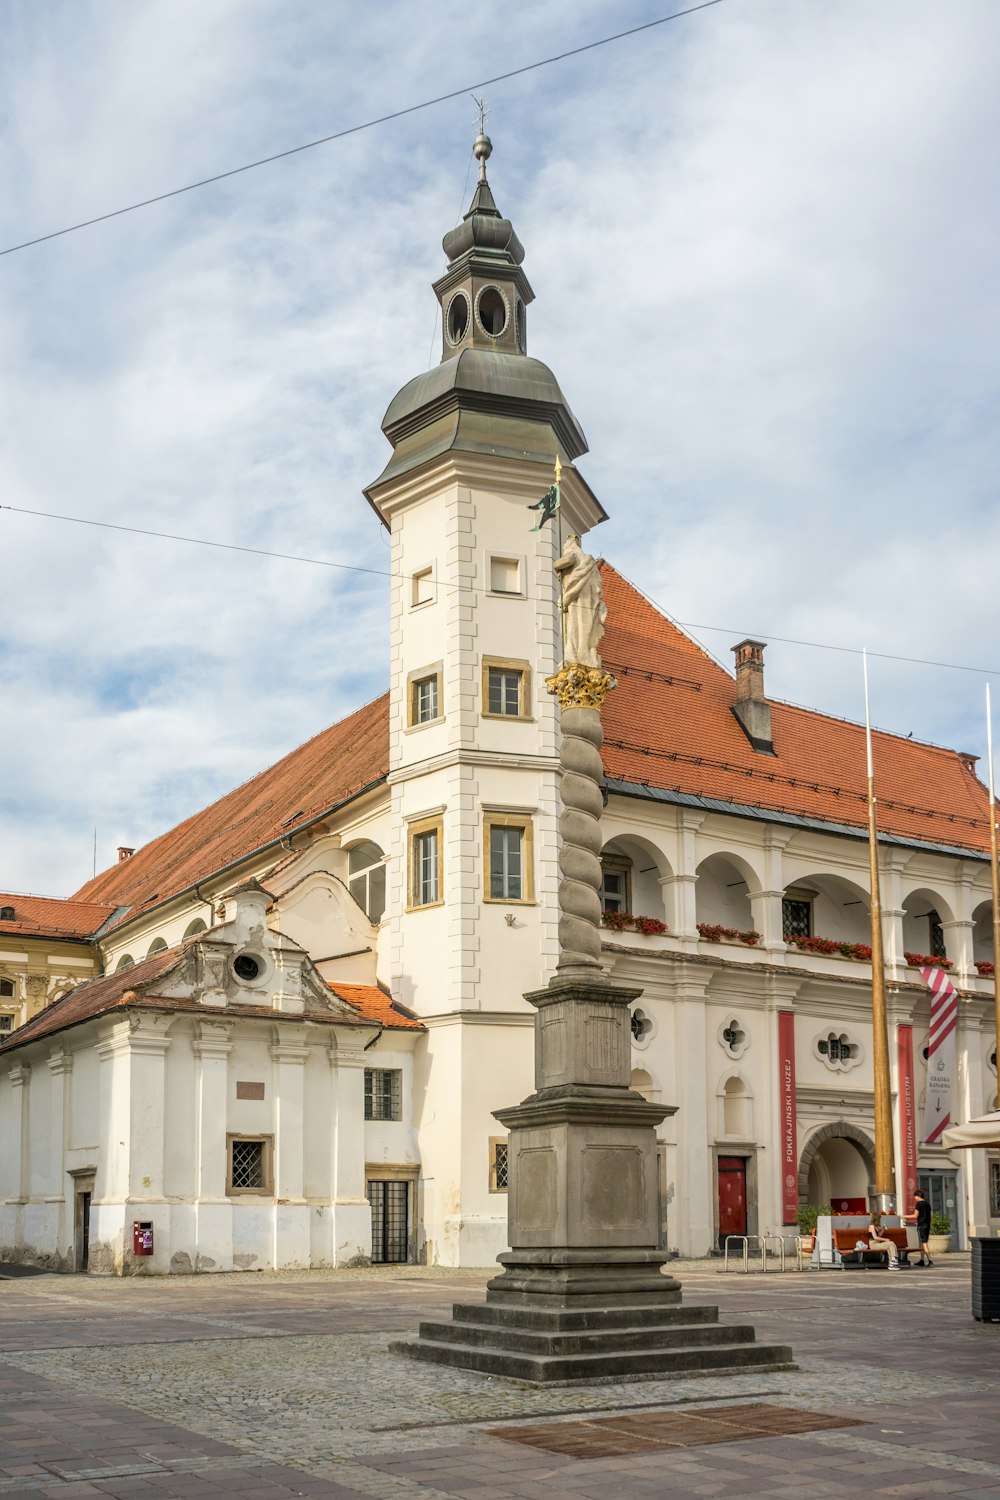 Maribor Castle with a tower